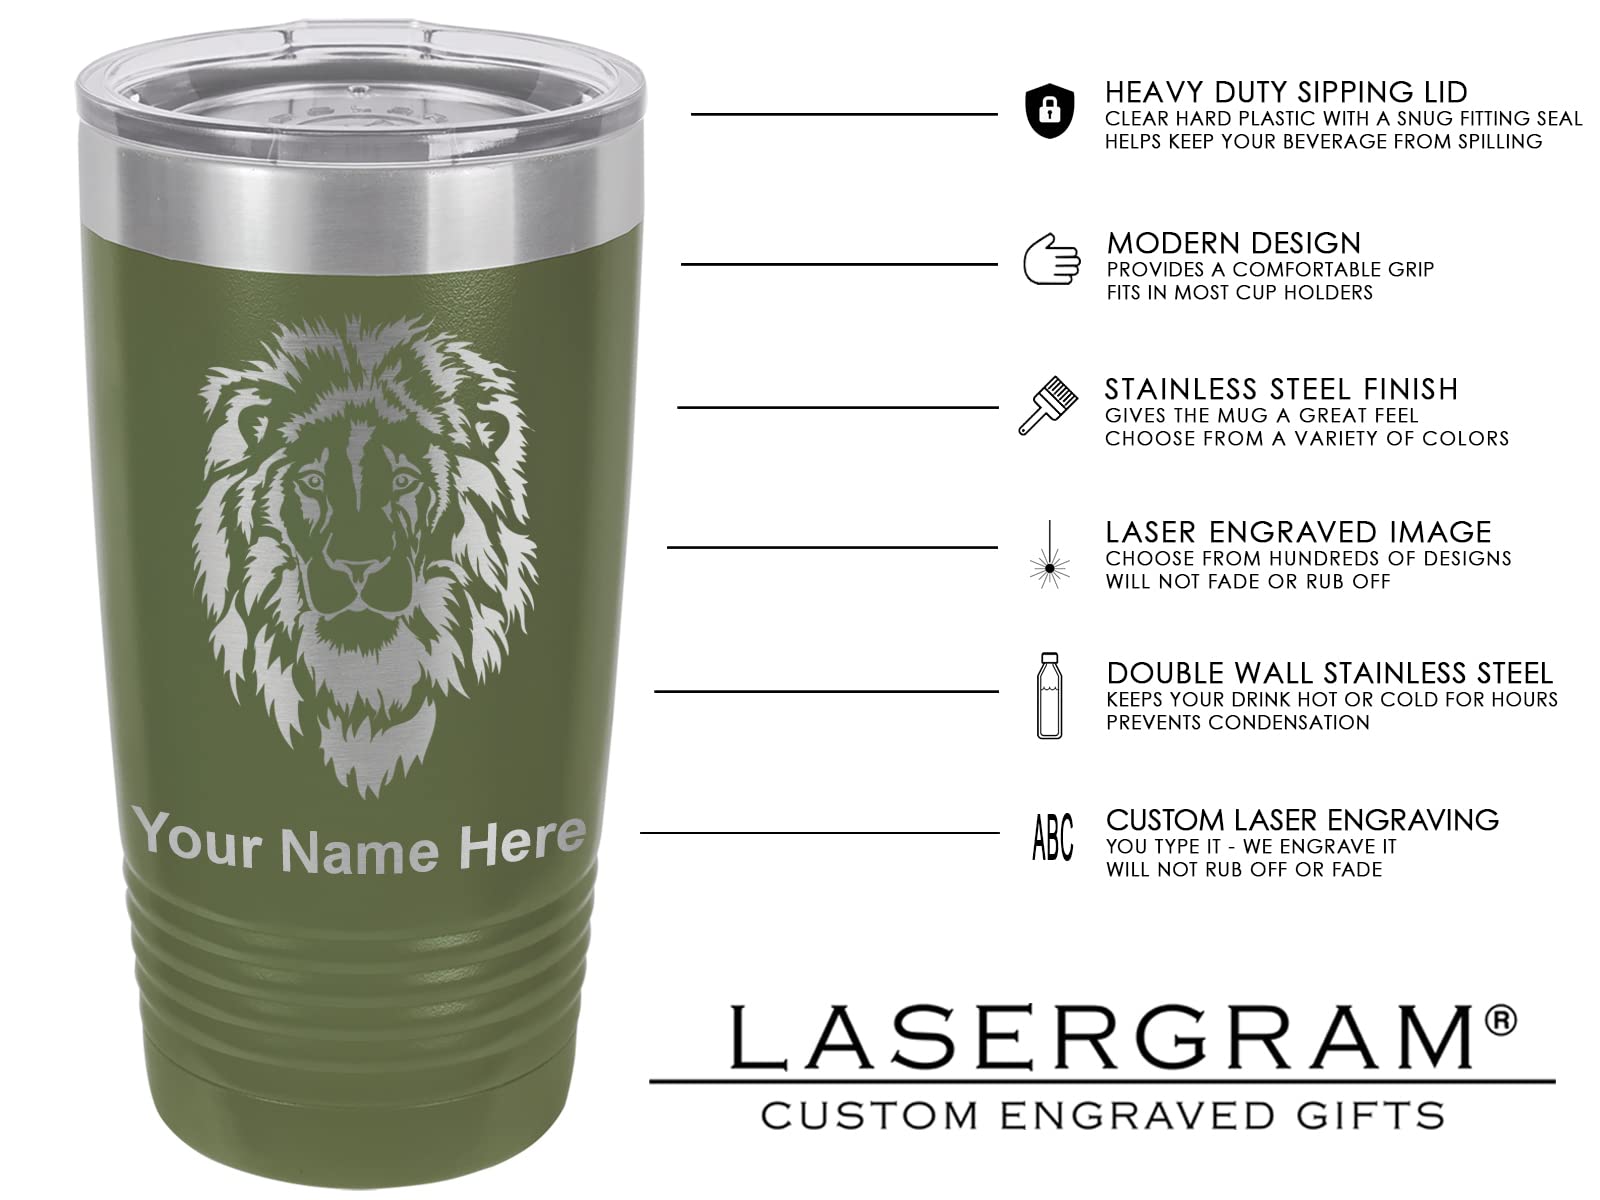 LaserGram 20oz Vacuum Insulated Tumbler Mug, Circle A, Personalized Engraving Included (Camo Green)